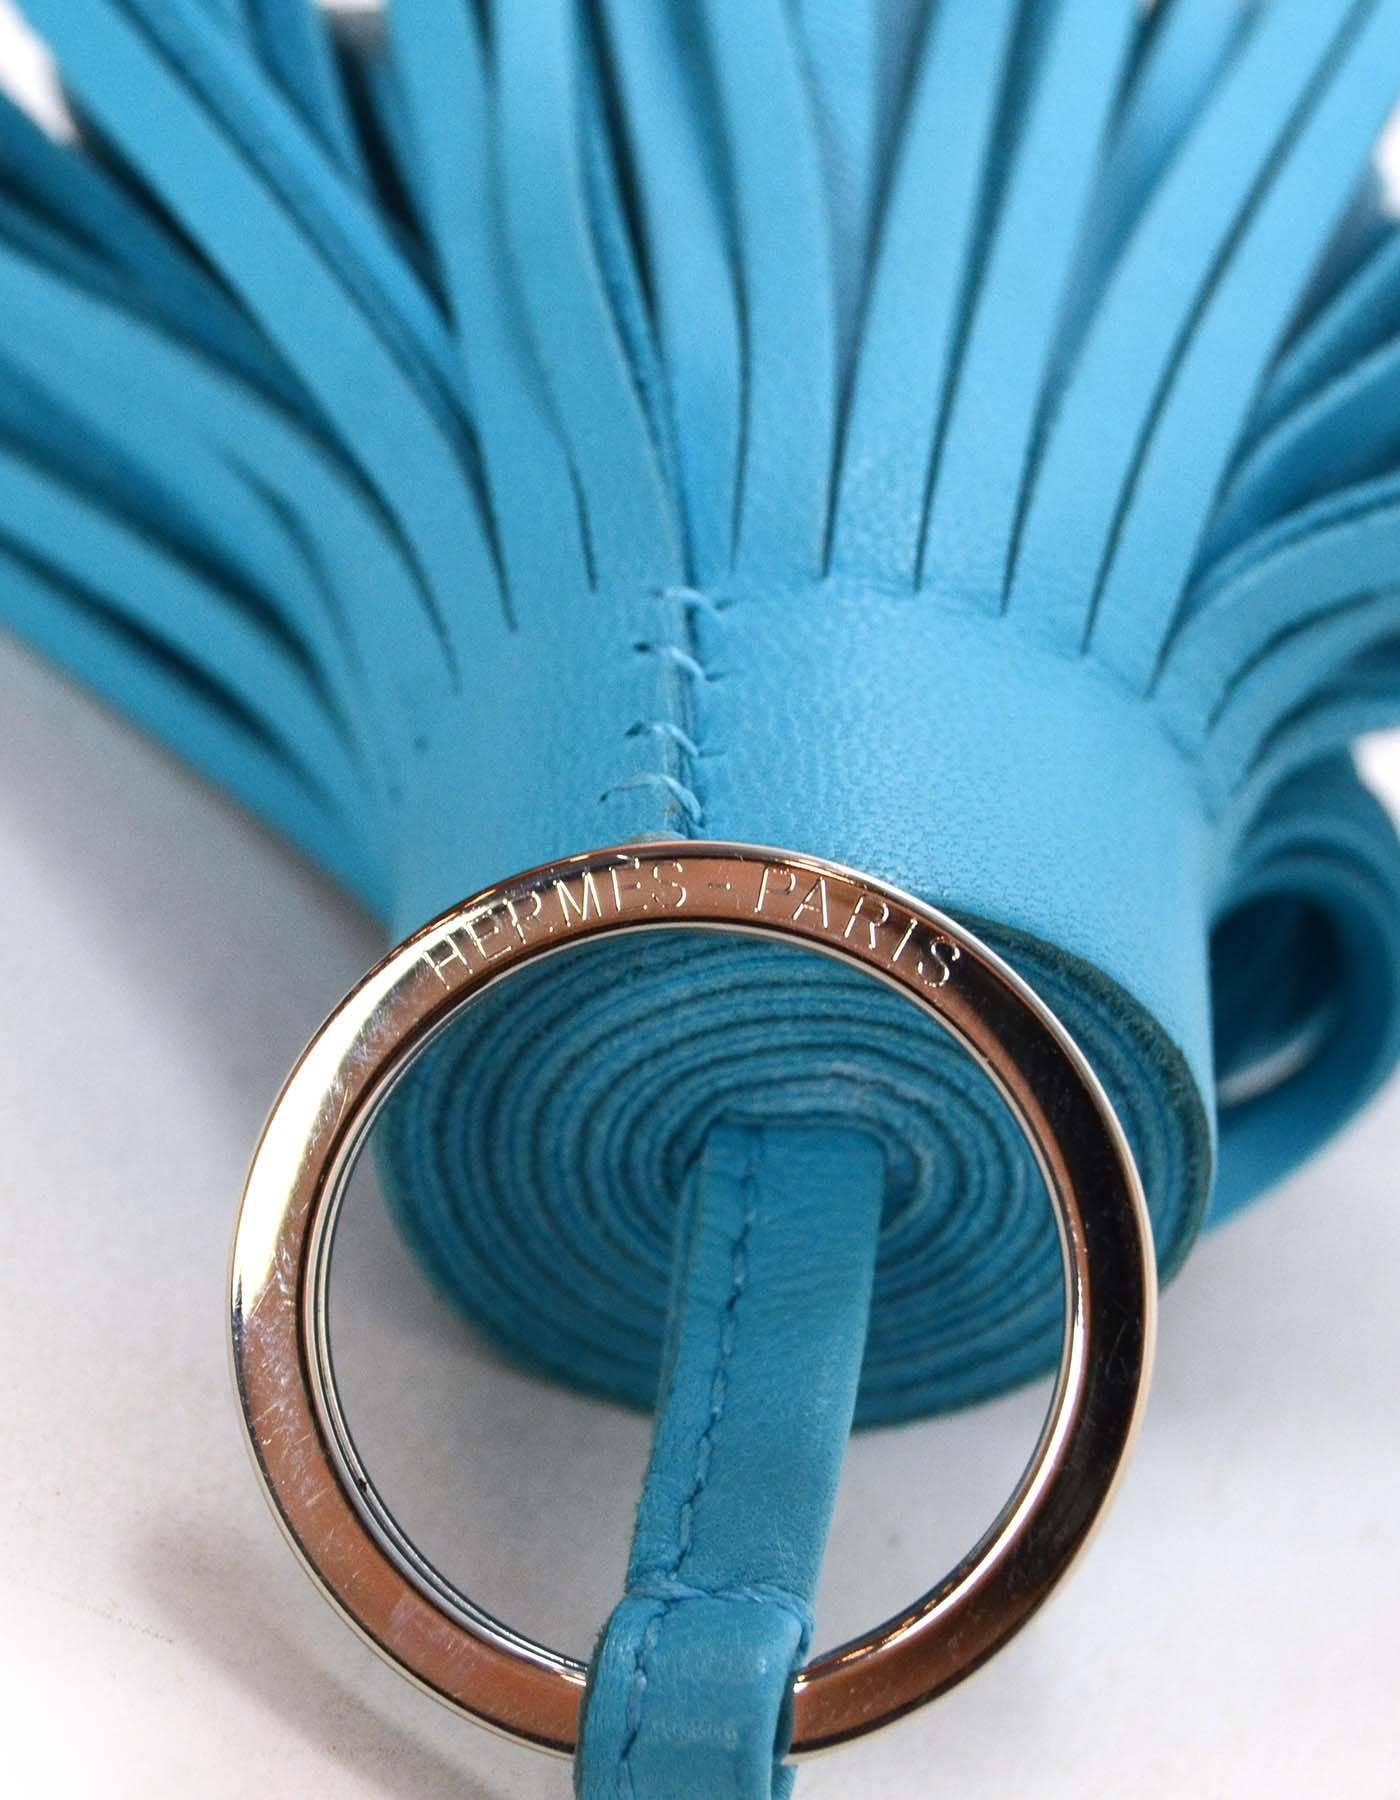 Hermes Turquoise Carmen Tassel Key Ring
Color: Turquoise
Hardware: Palladium
Materials: Leather
Closure/Opening: None
Stamp: Hermes Paris 
Overall Condition: Excellent pre-owned condition
Measurements: 
Total Length: 4.5